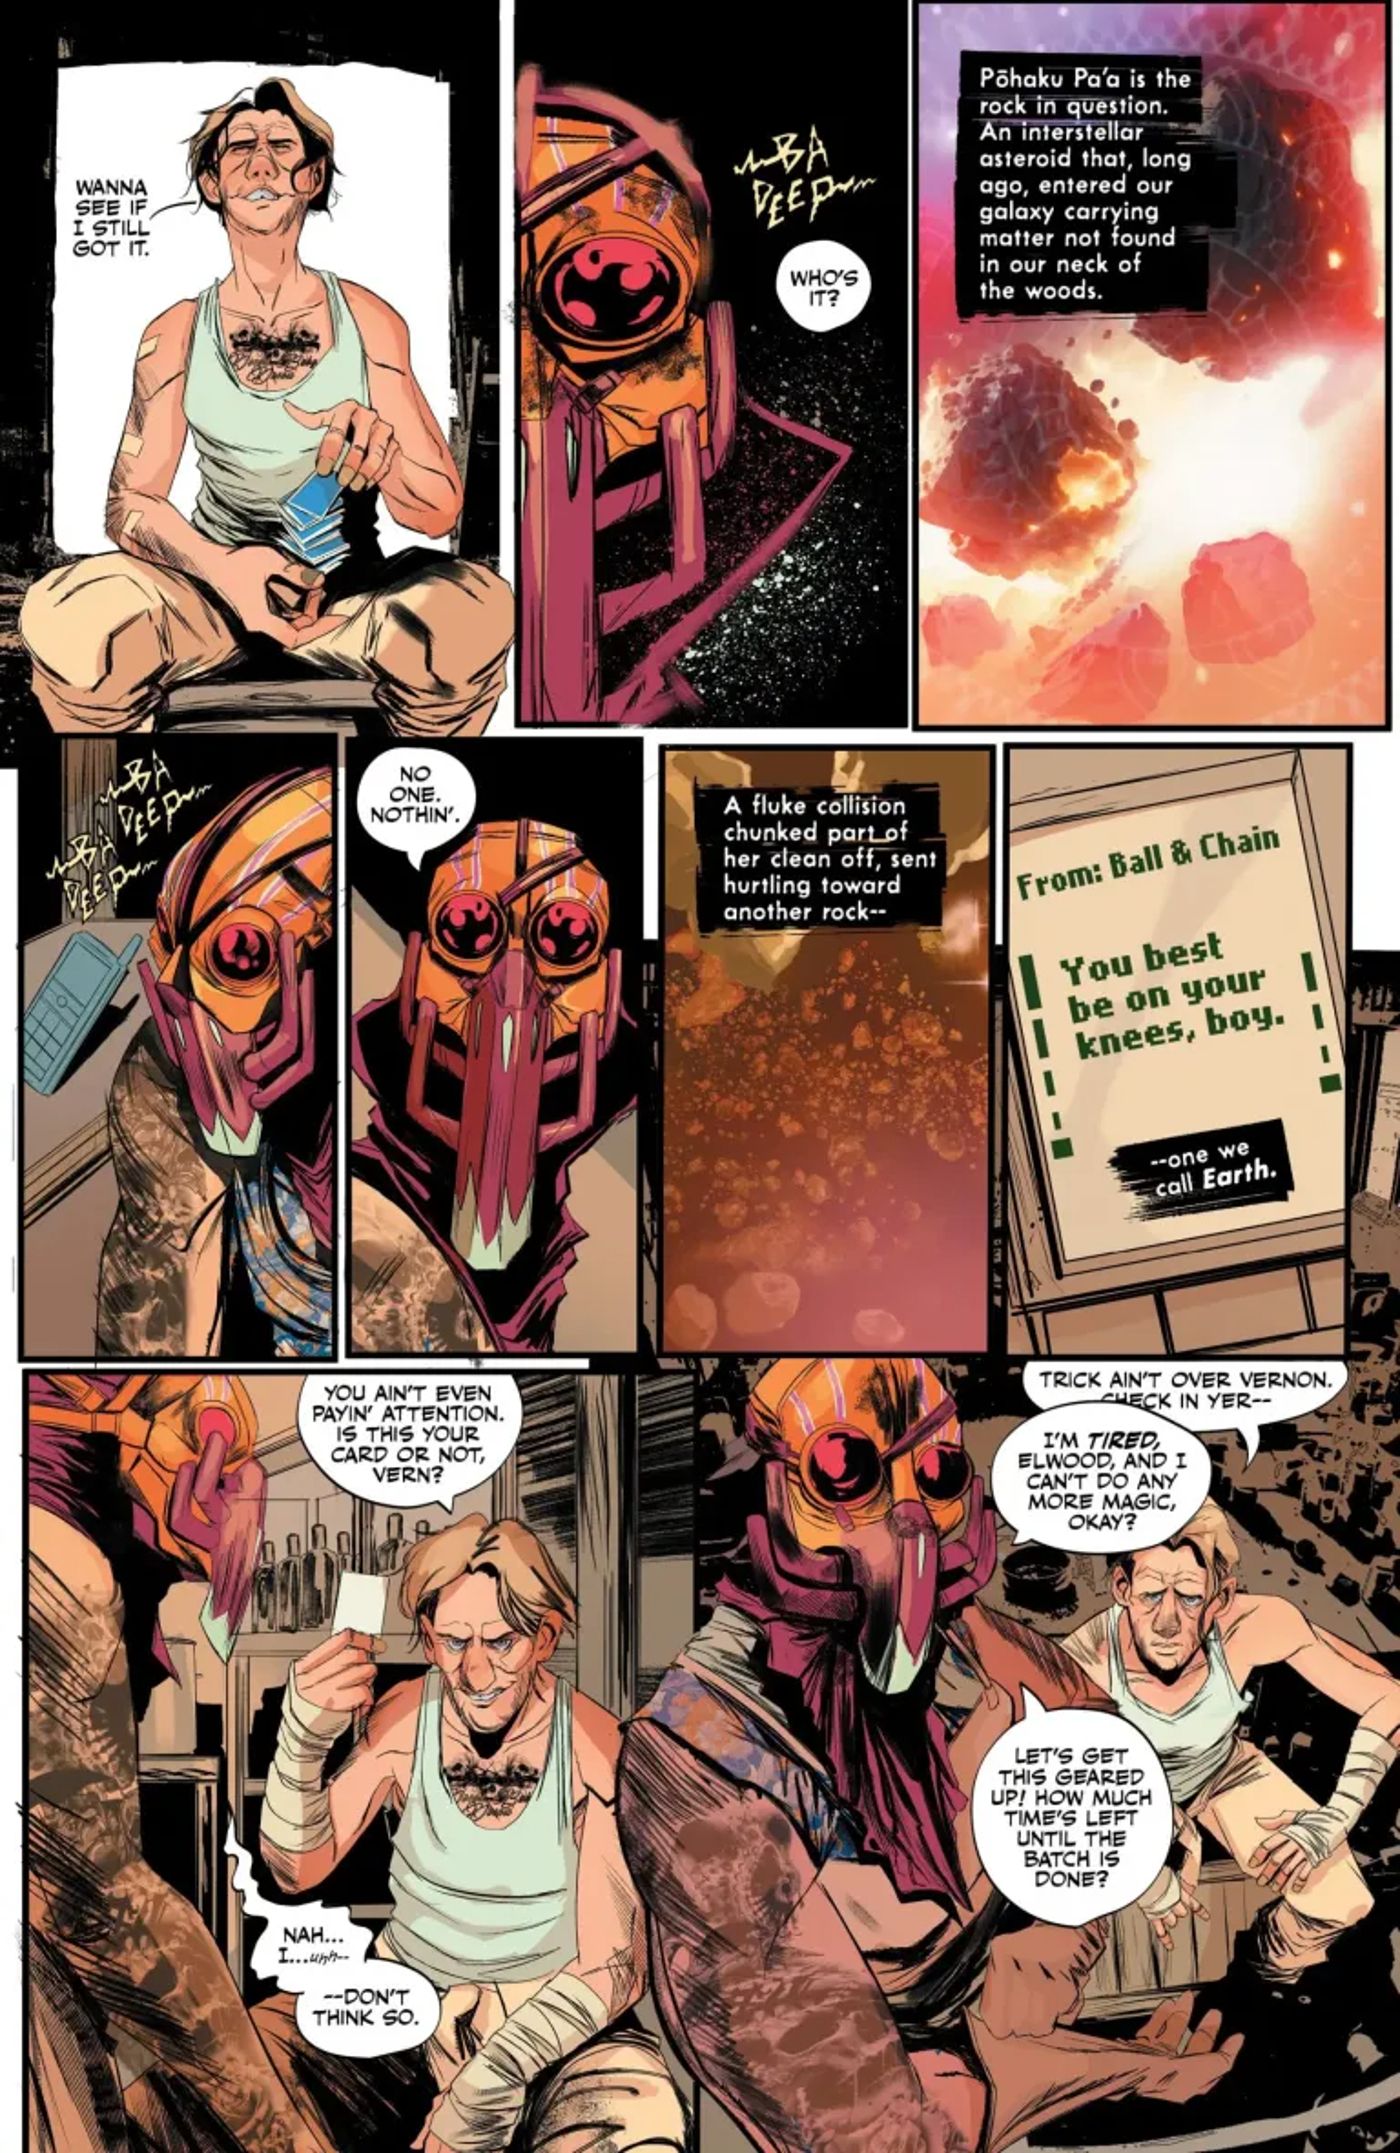 Golgotha Motor Mountain preview page, introducing meth cookers Vernon and Elwood just as a meteor hits their lab